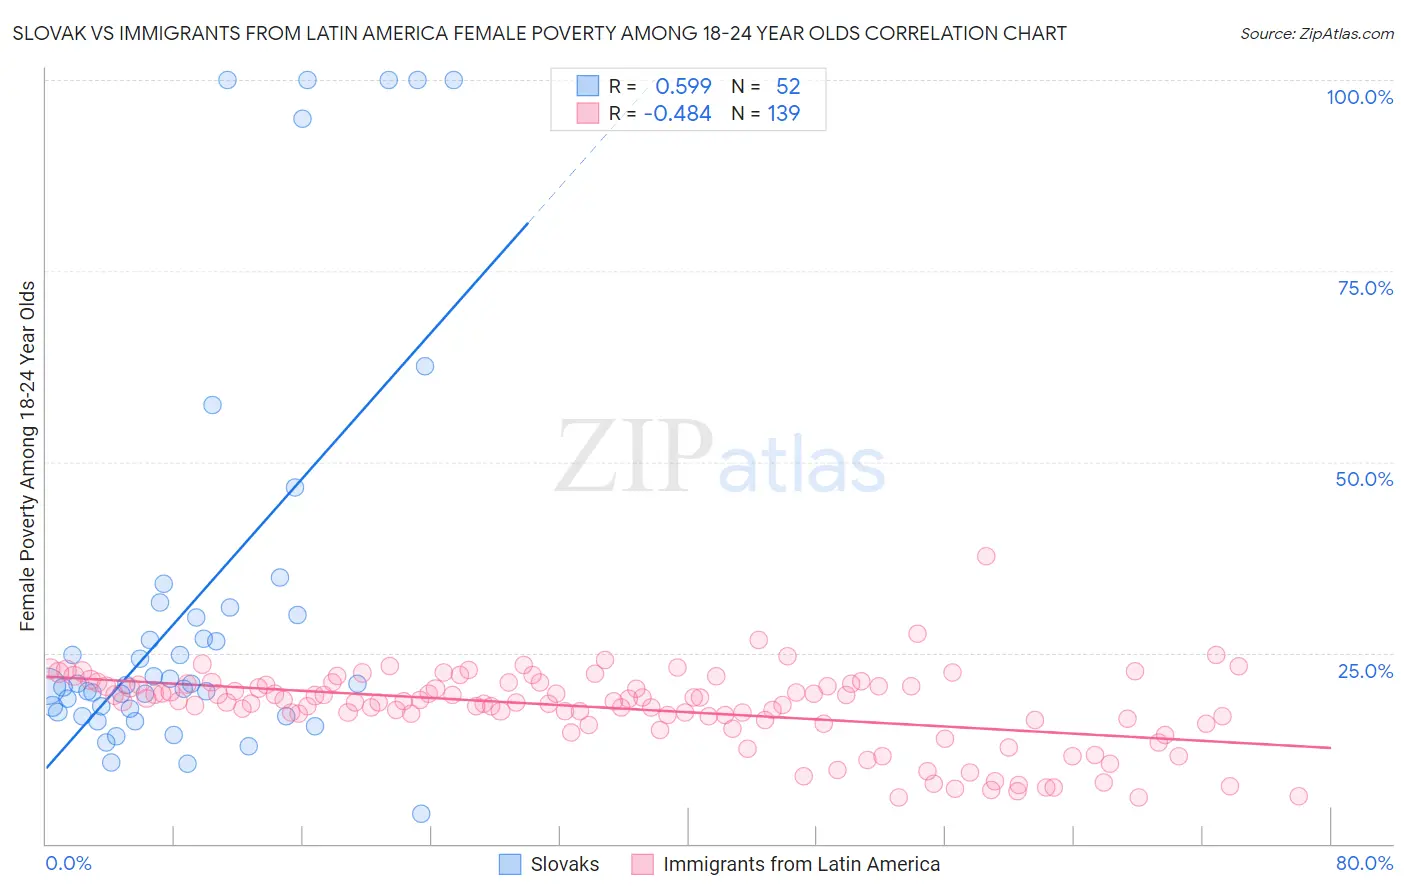 Slovak vs Immigrants from Latin America Female Poverty Among 18-24 Year Olds